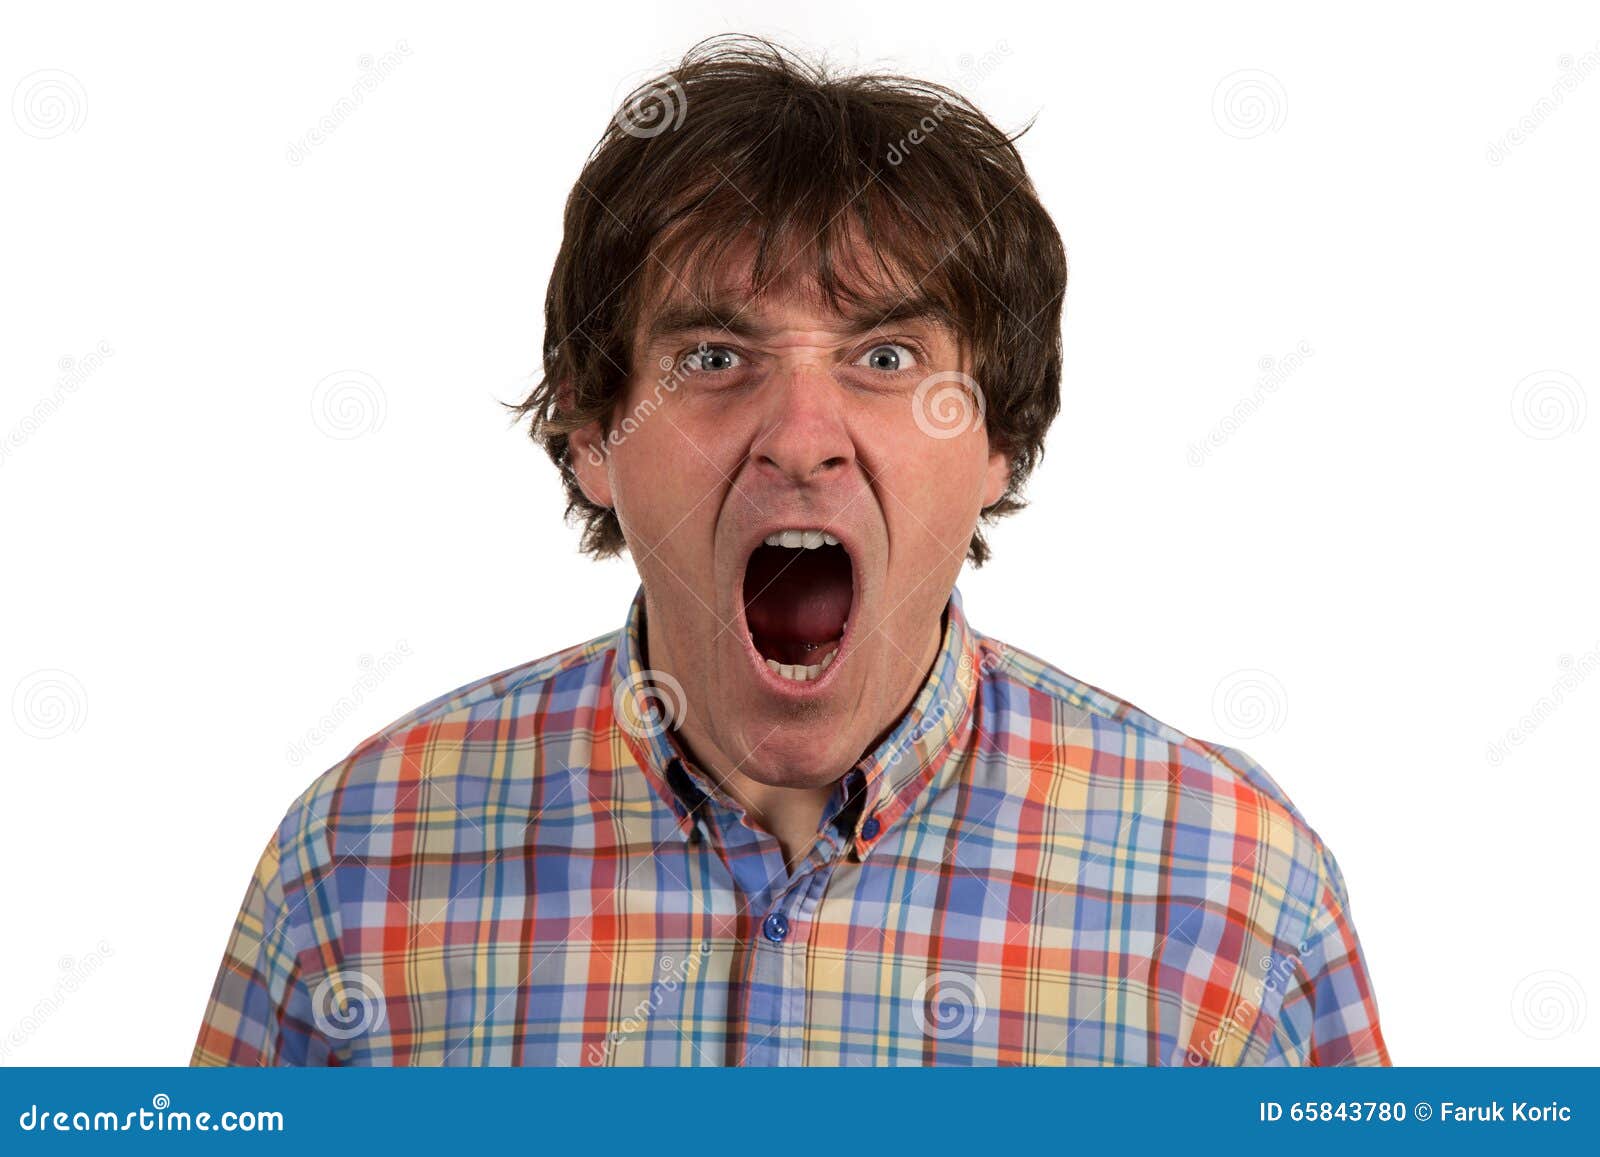 close up portrait of young man yelling with open mouth